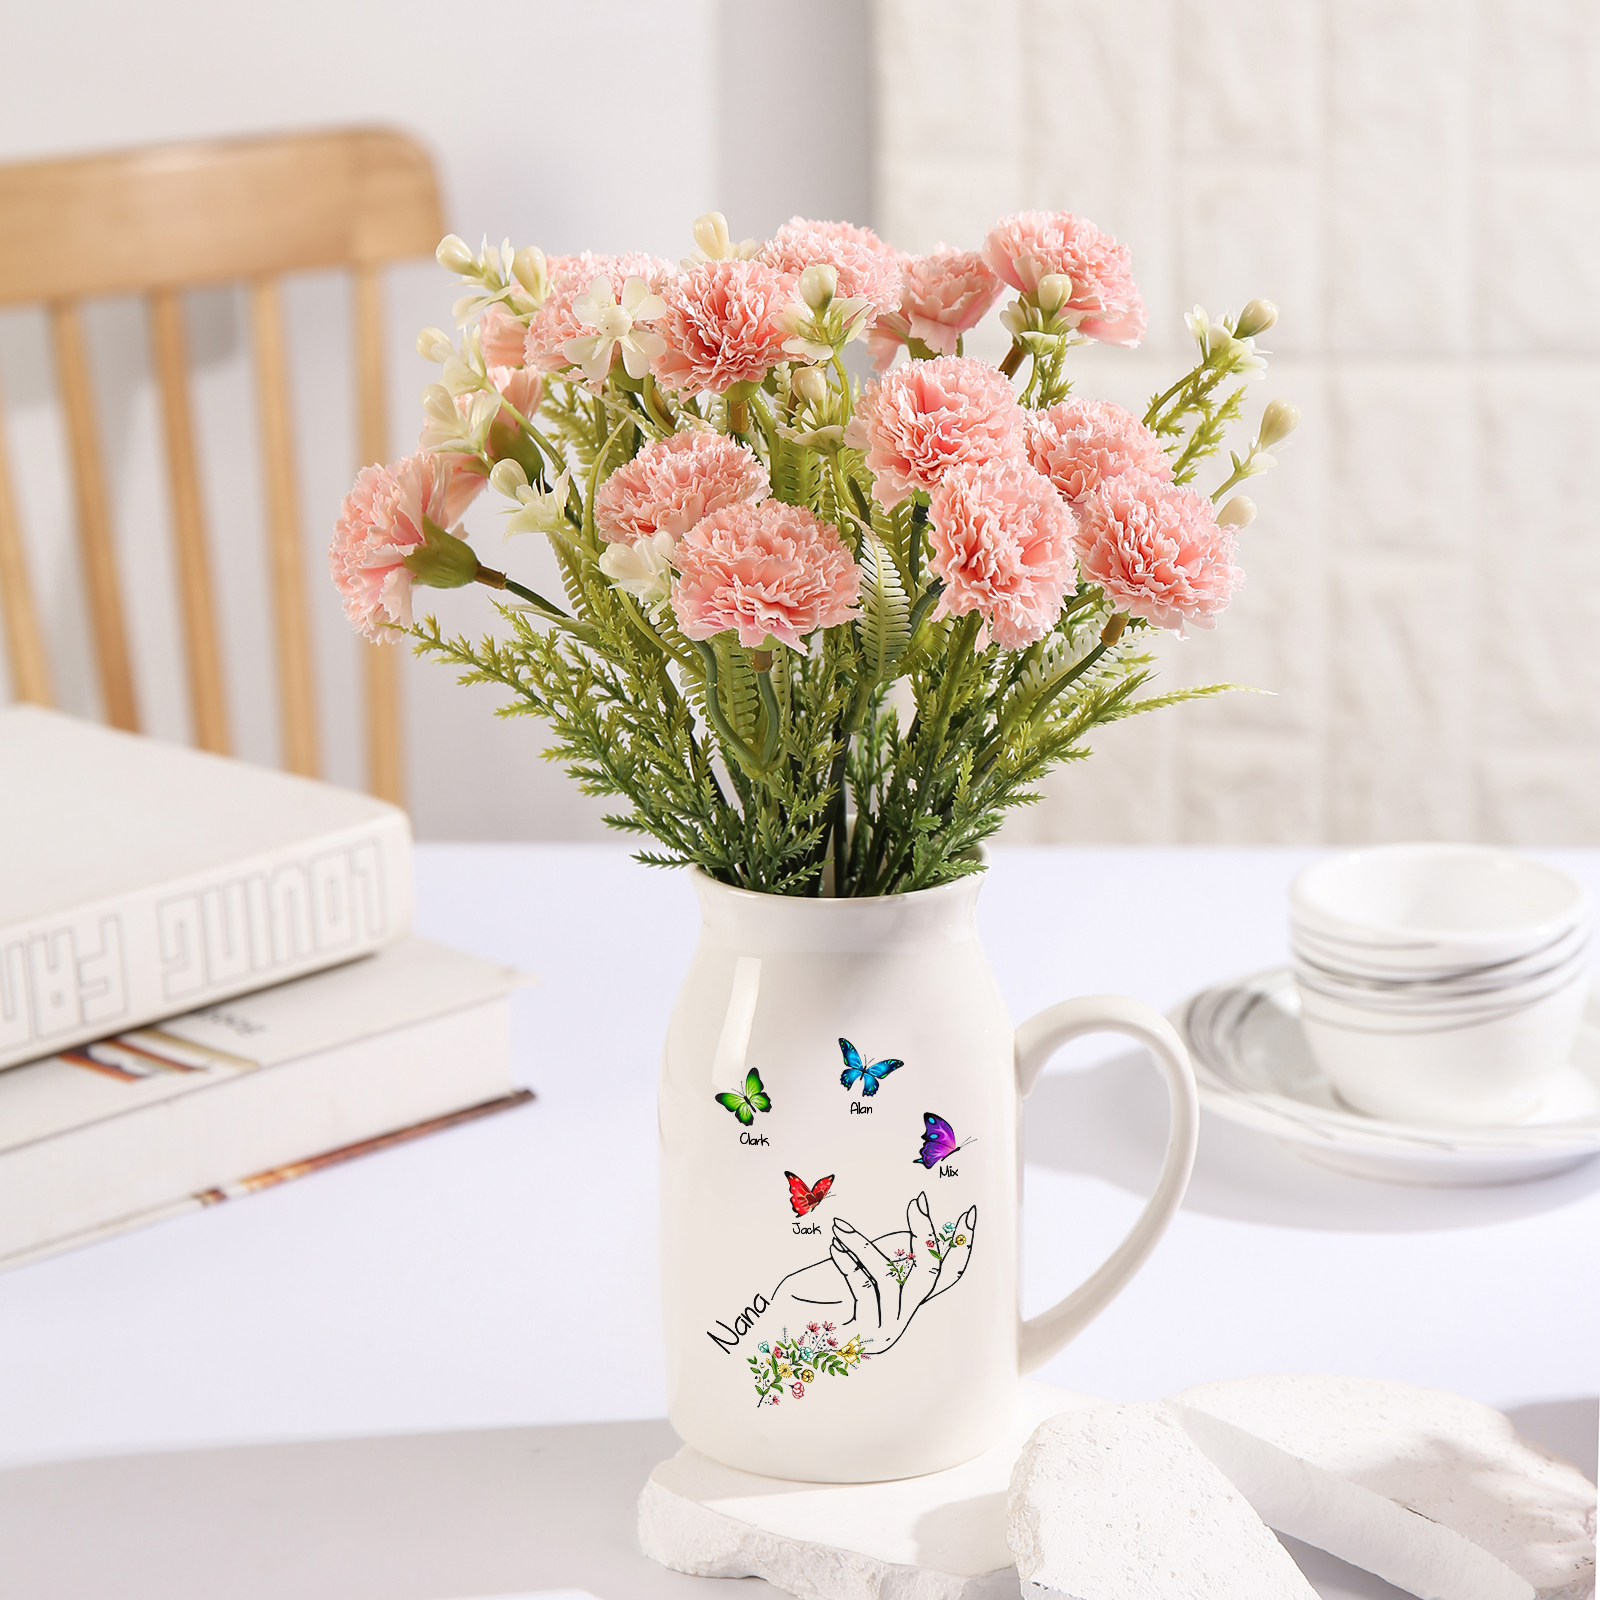 4 Names - Personalized Exquisite Flower Hand Butterfly Style Ceramic Cup With Customizable Names As a Special Gift For Nana/Mom